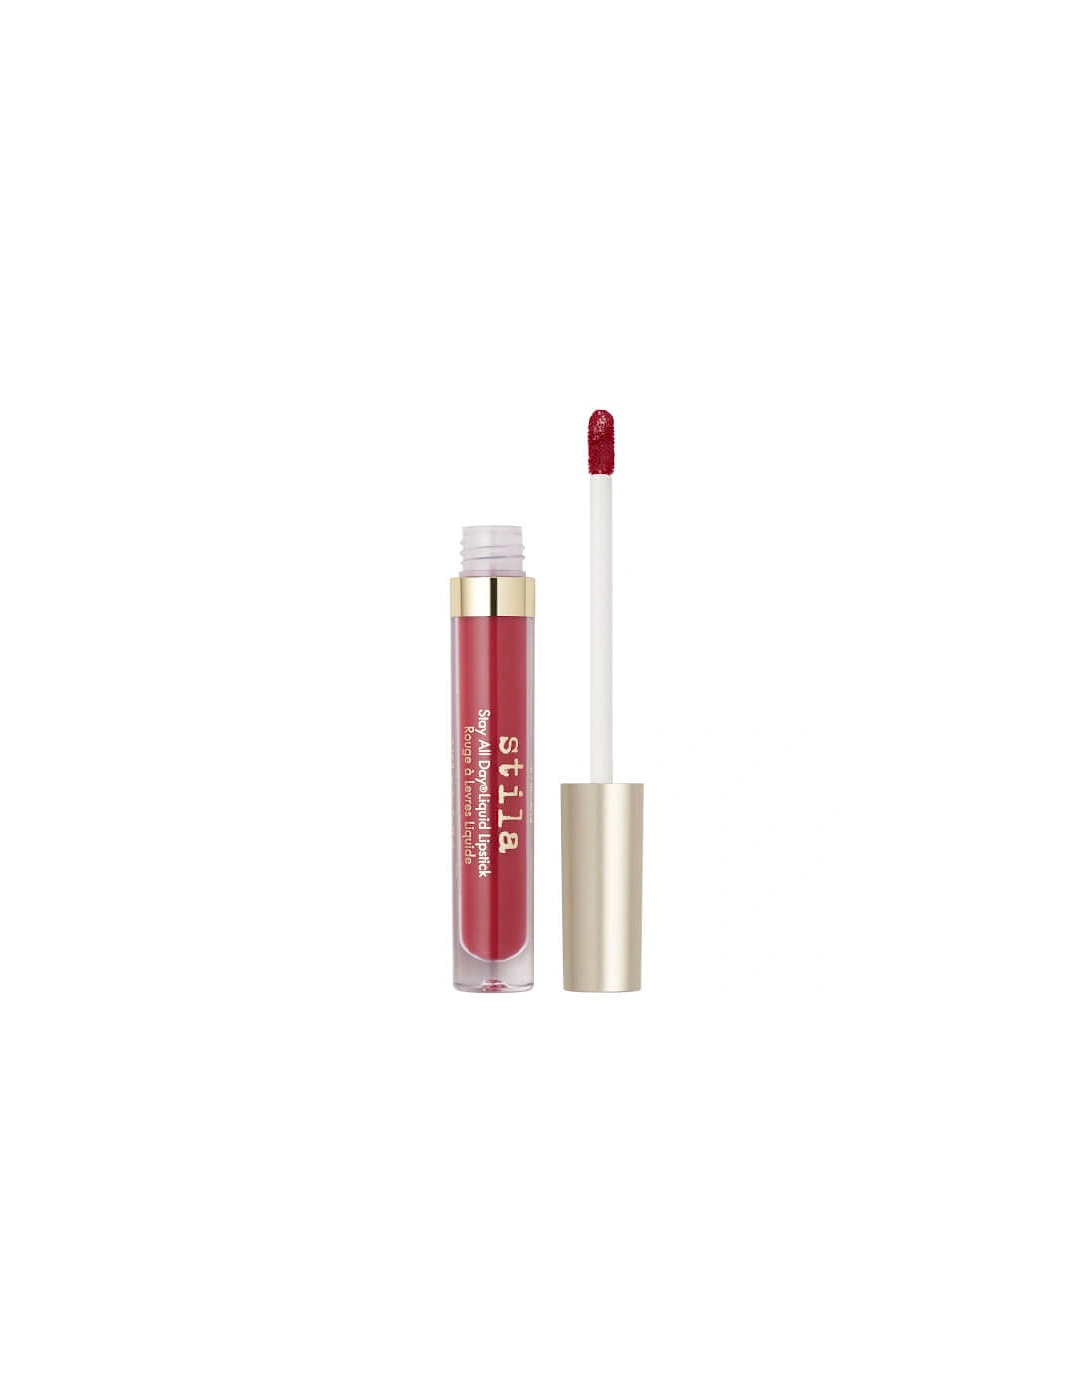 Stay All Day Liquid Lipstick - Sheer Passione, 2 of 1